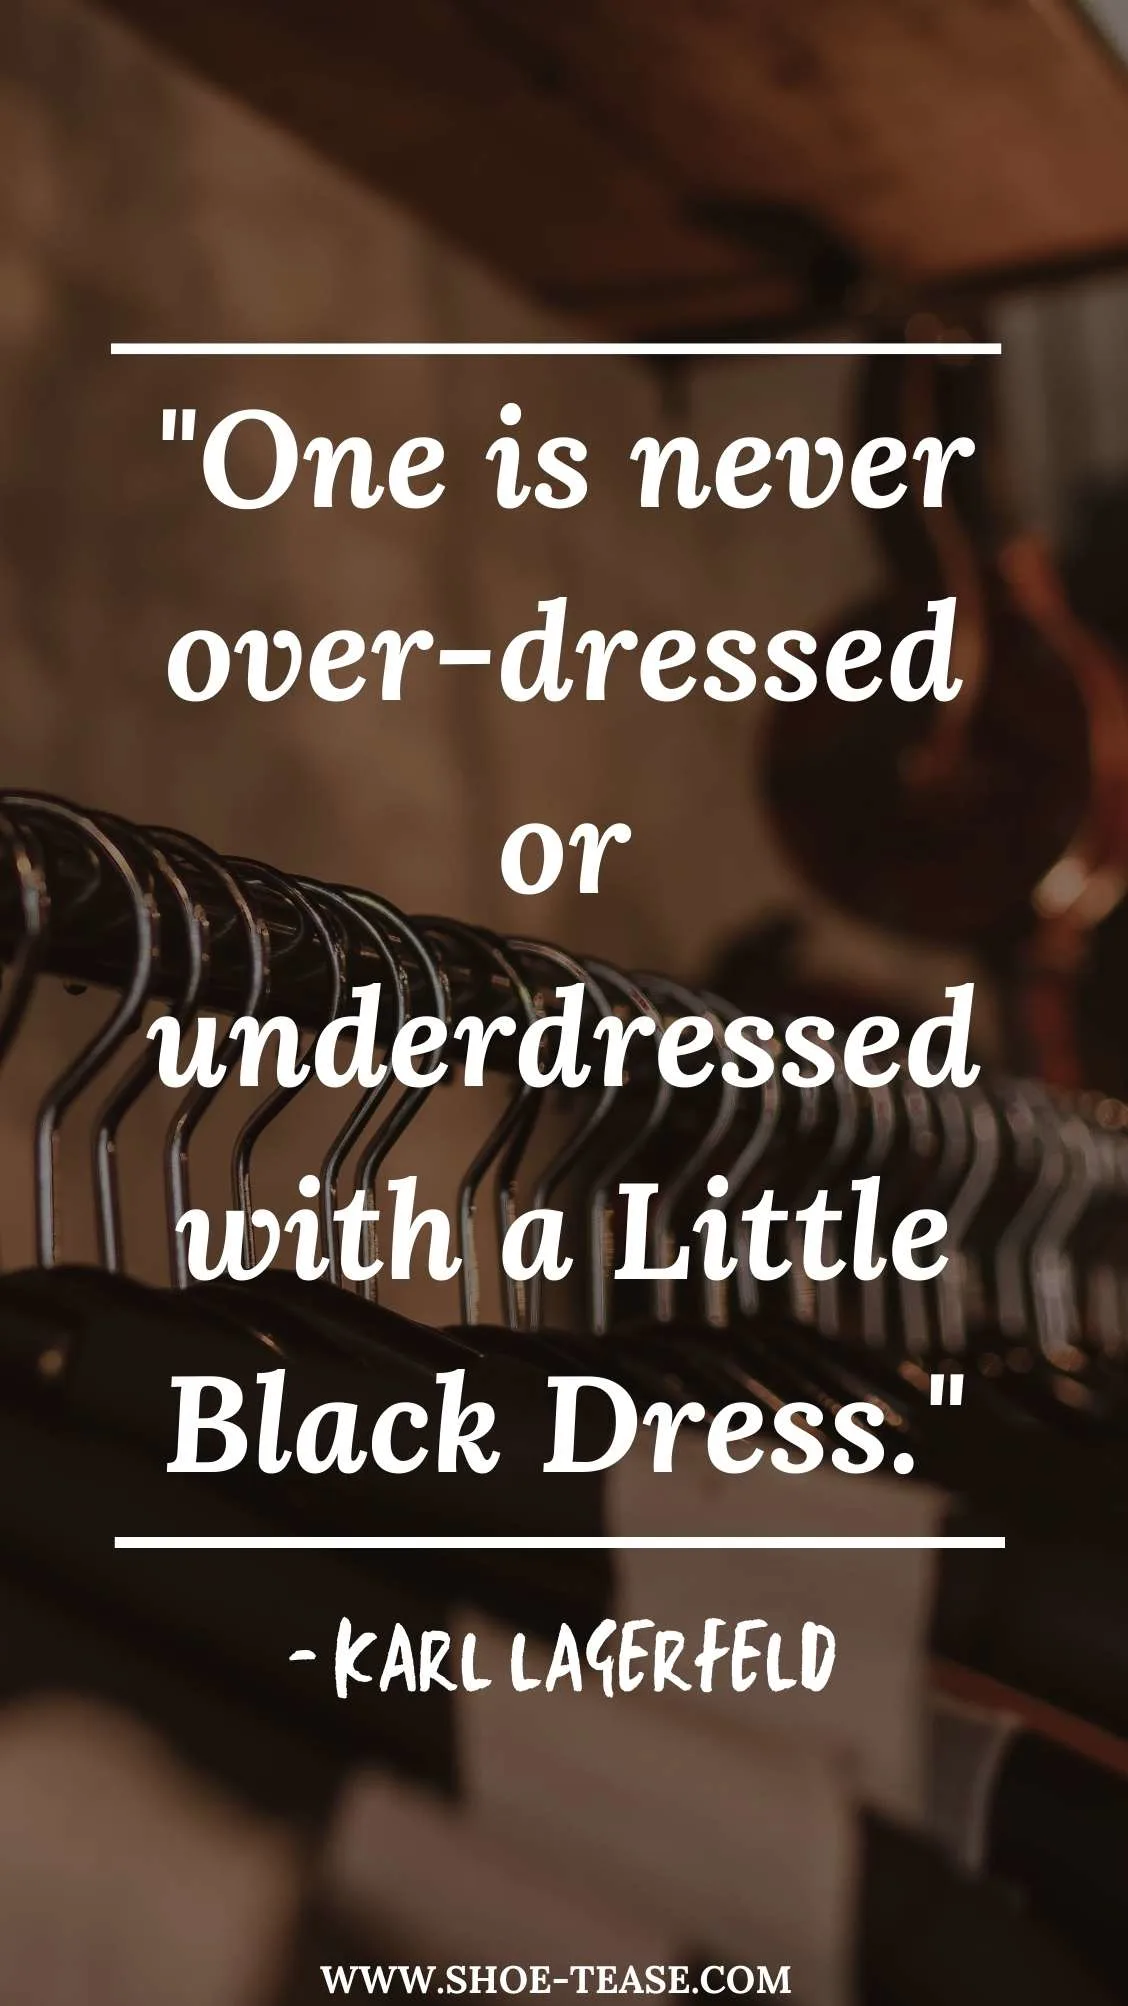 magi Uhøfligt Tag fat 60 Best Dress Quotes, Black & Red Dress Quotes & Captions for Instagram